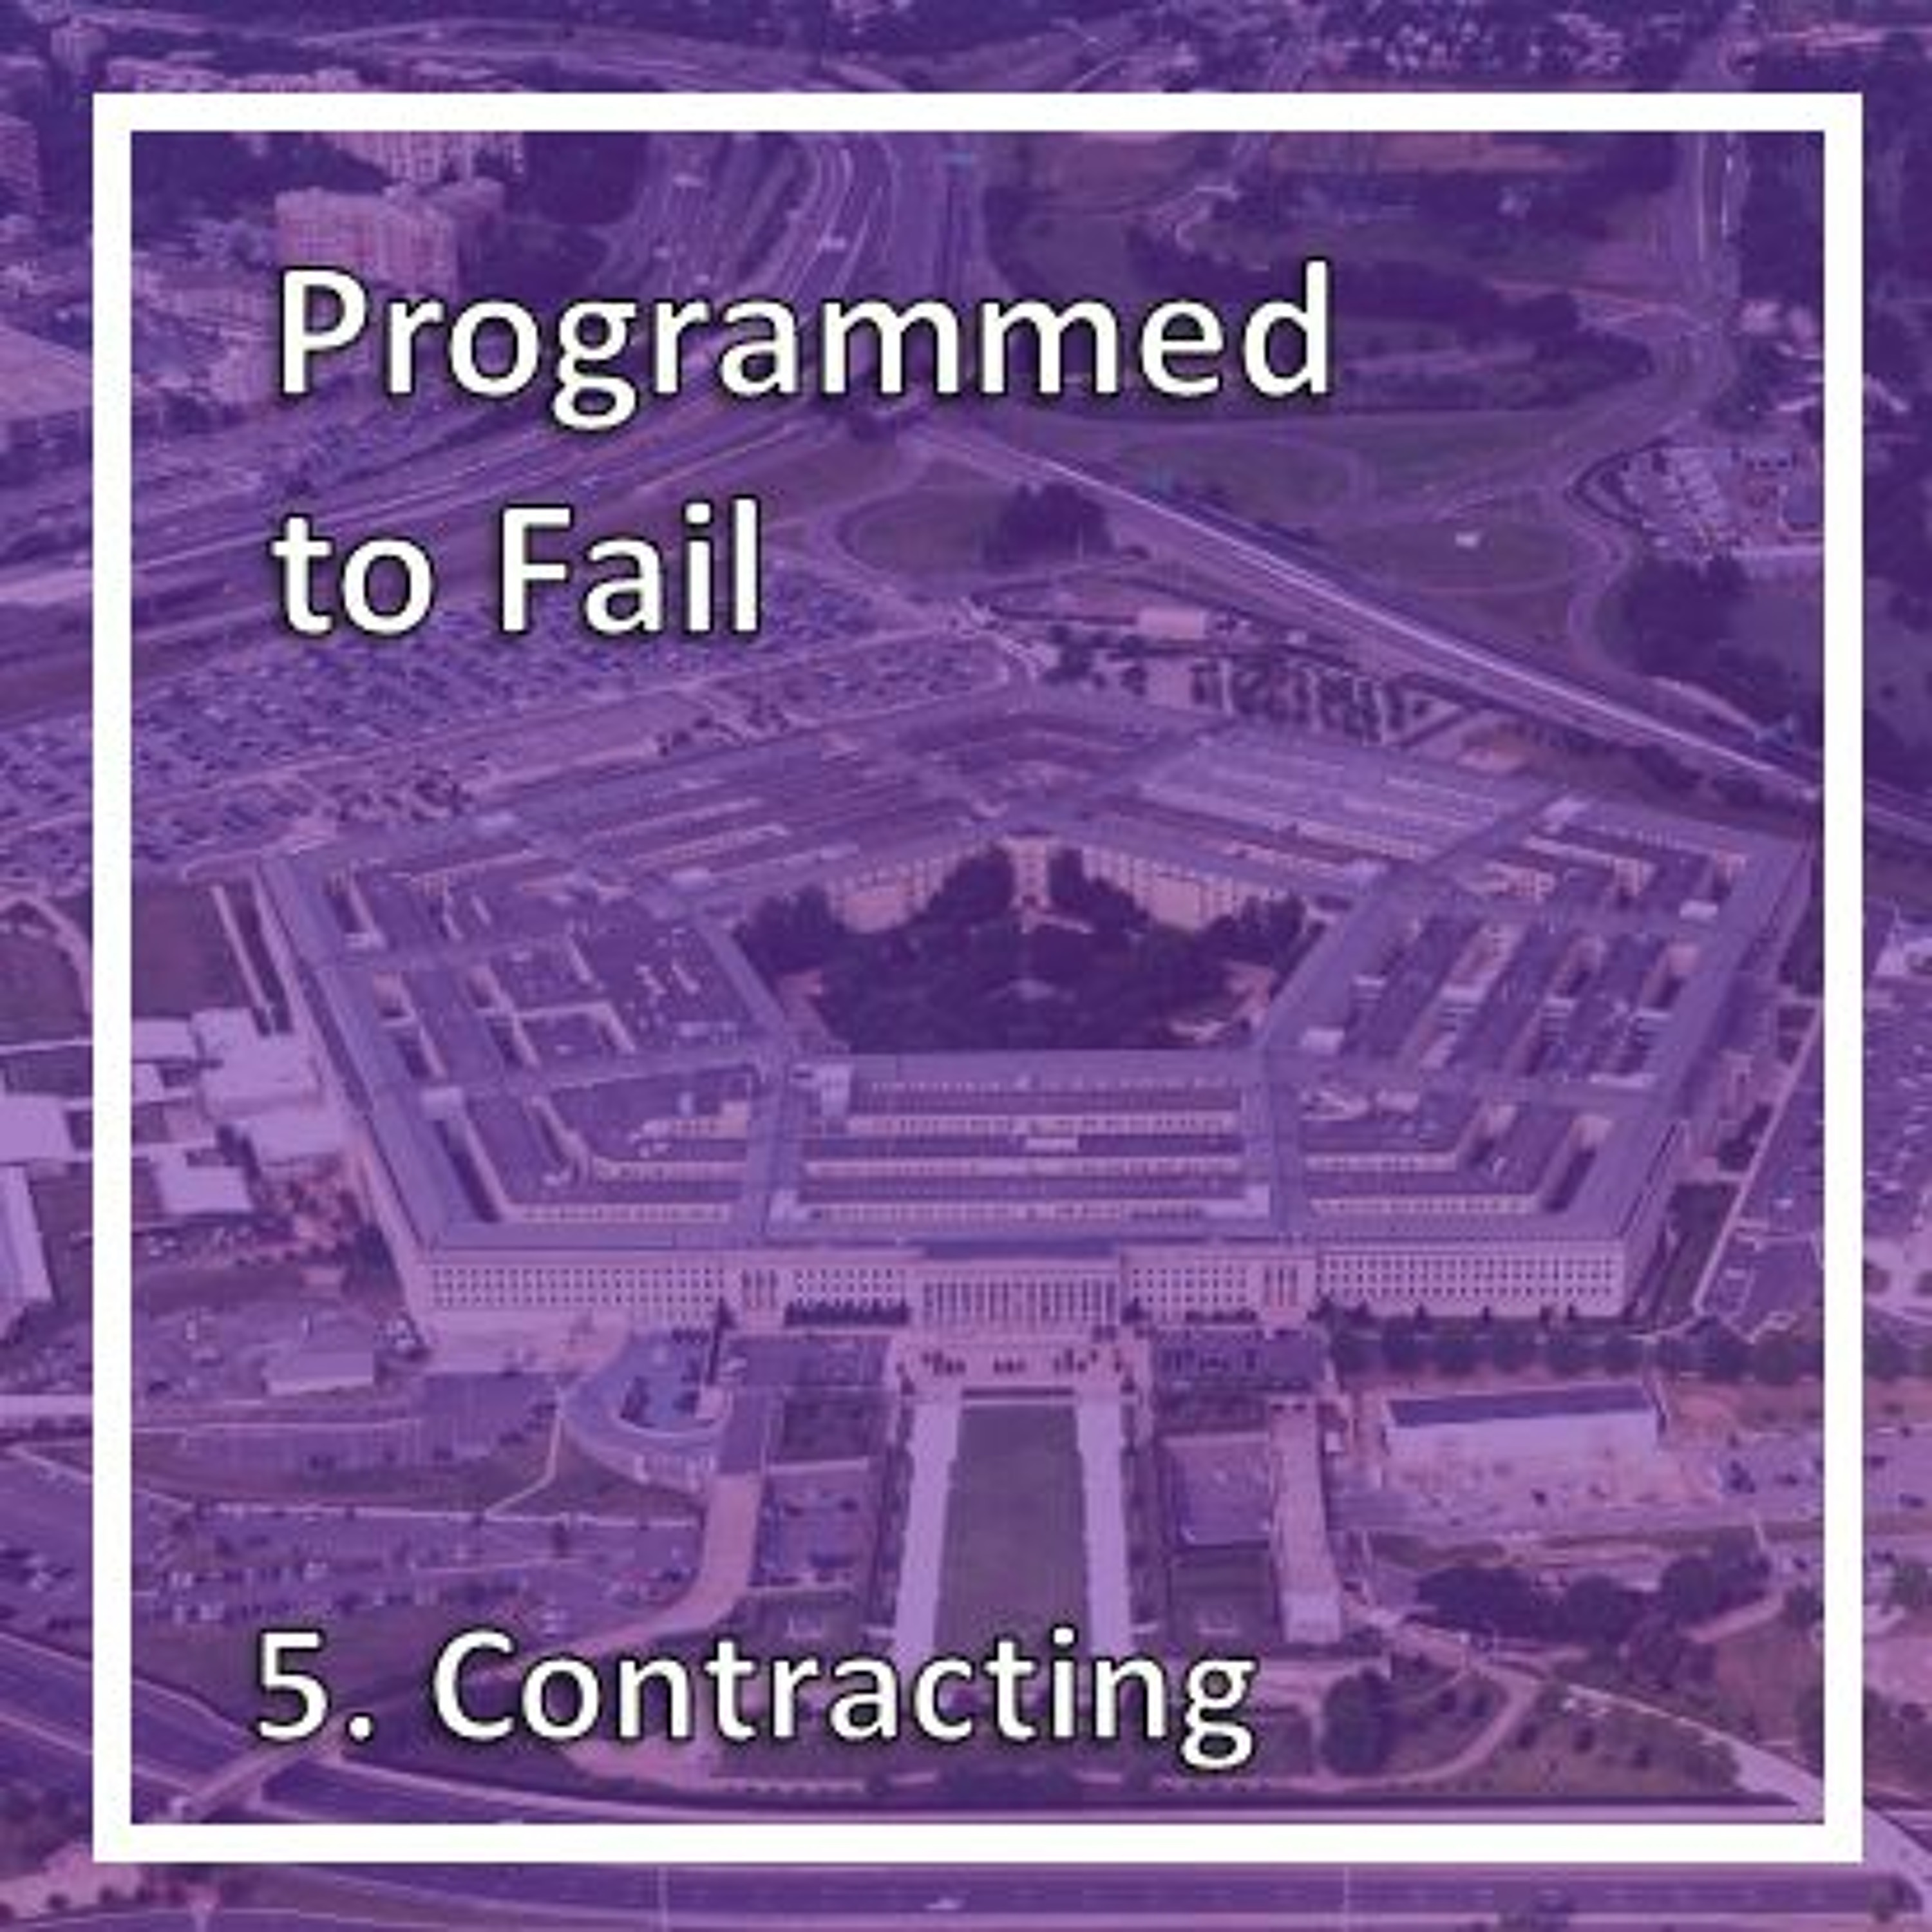 Programmed to Fail - 5. Contracting